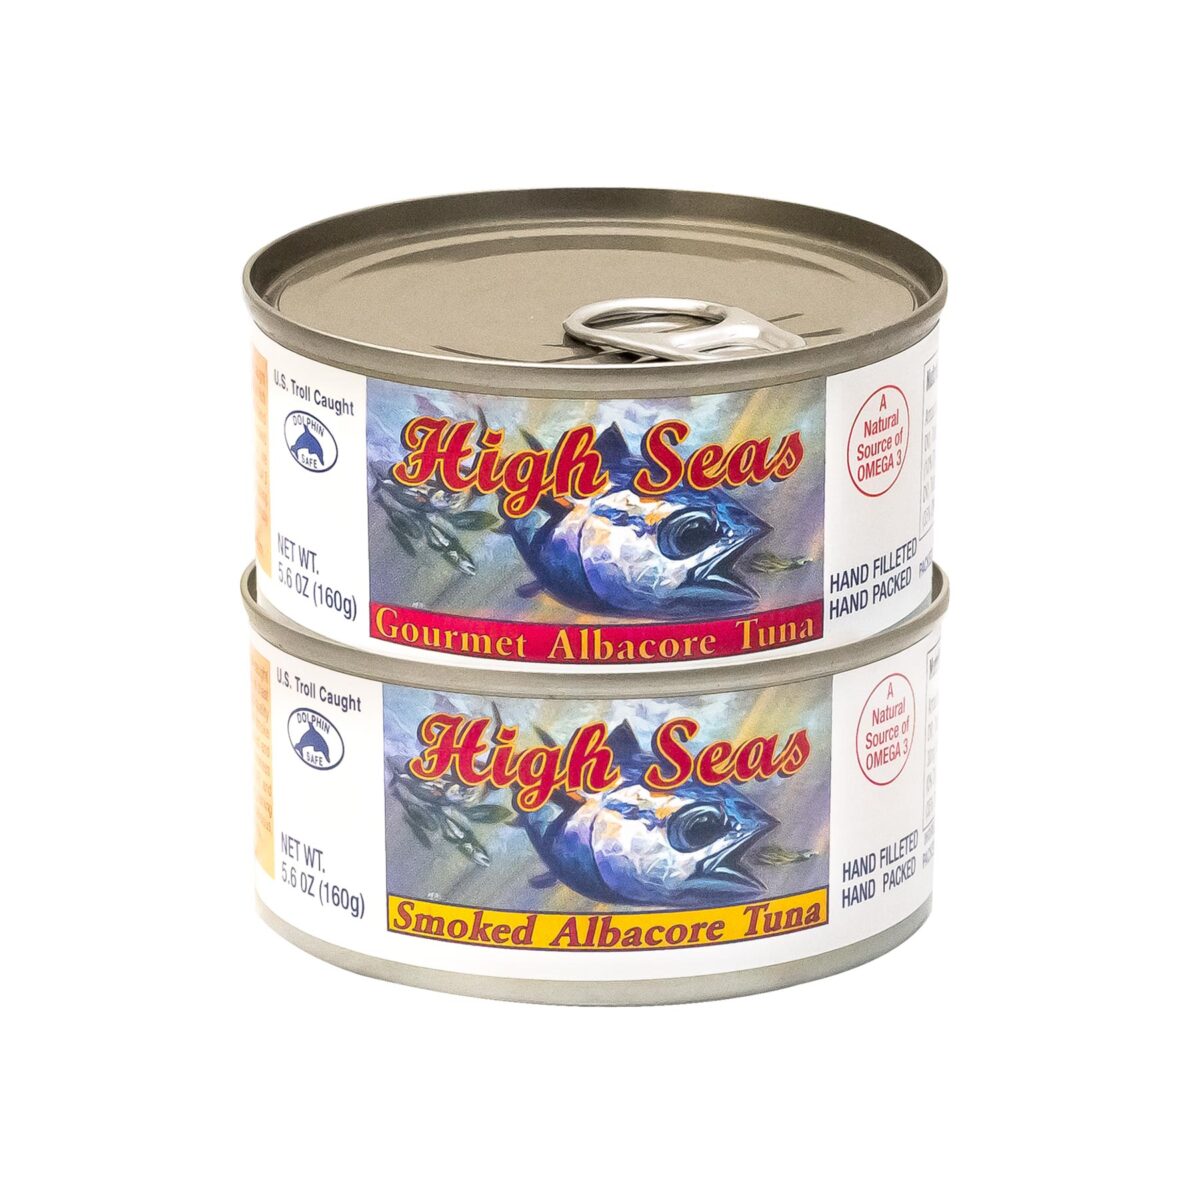 Product shot of gourmet and smoked hand filleted and hand packed Albacore Tuna.